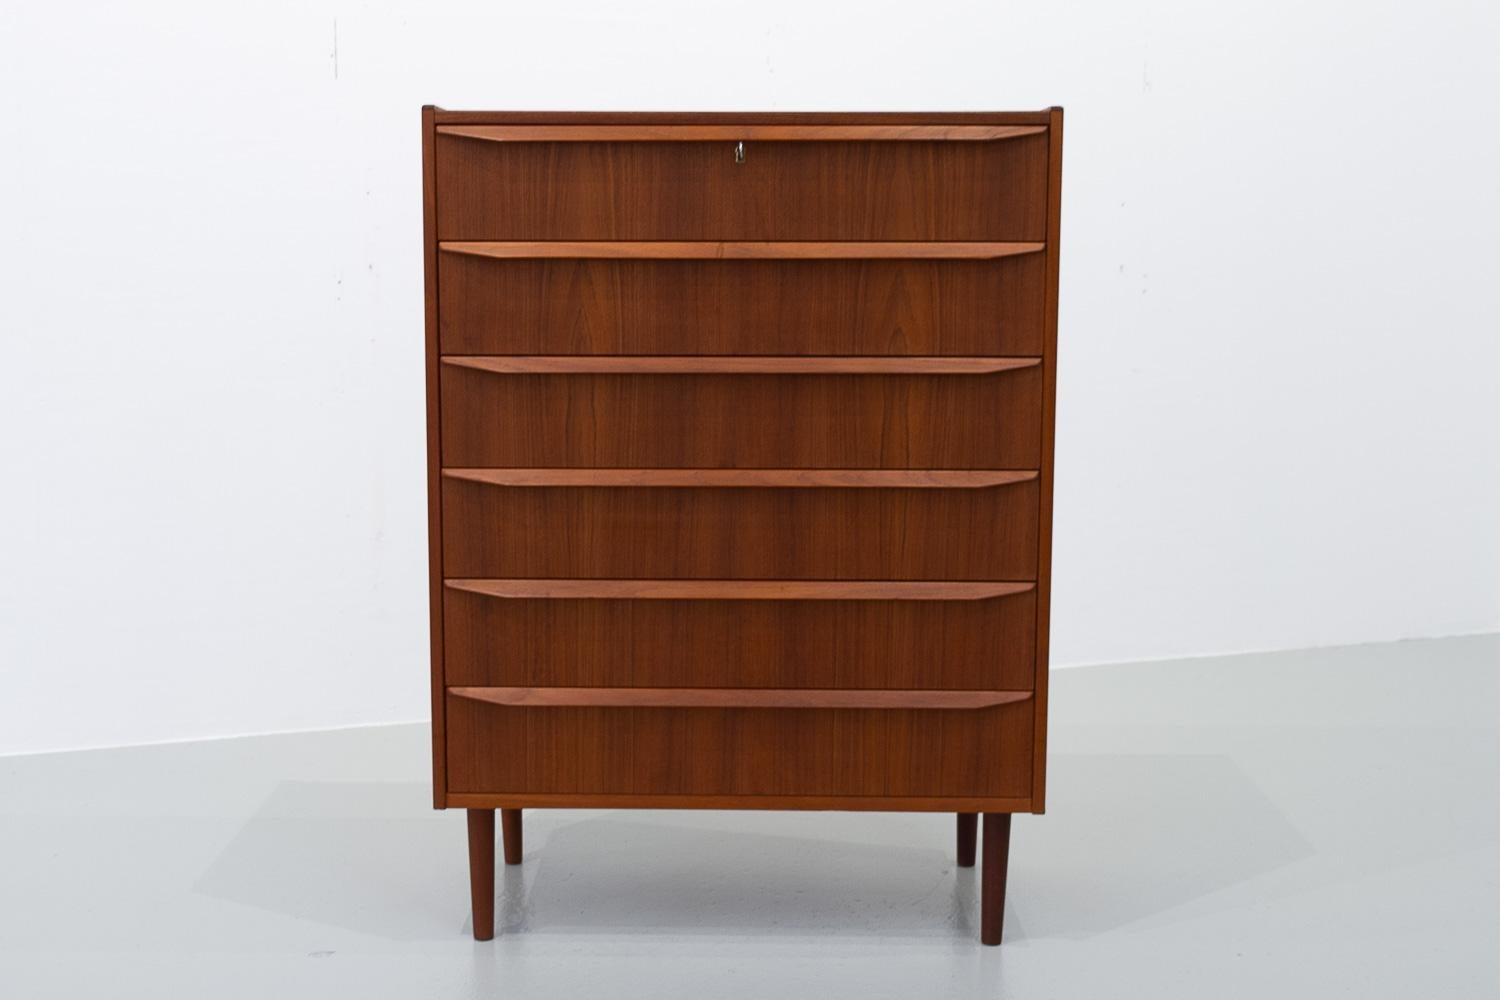 Danish Modern Teak Chest of Drawers, 1960s.

Mid-century modern six drawer dresser in teak made in Denmark in the 1960s.

Beautiful matched veneer patterns on drawer fronts. Round tapered legs in solid teak. Wide drawer pulls in solid teak with